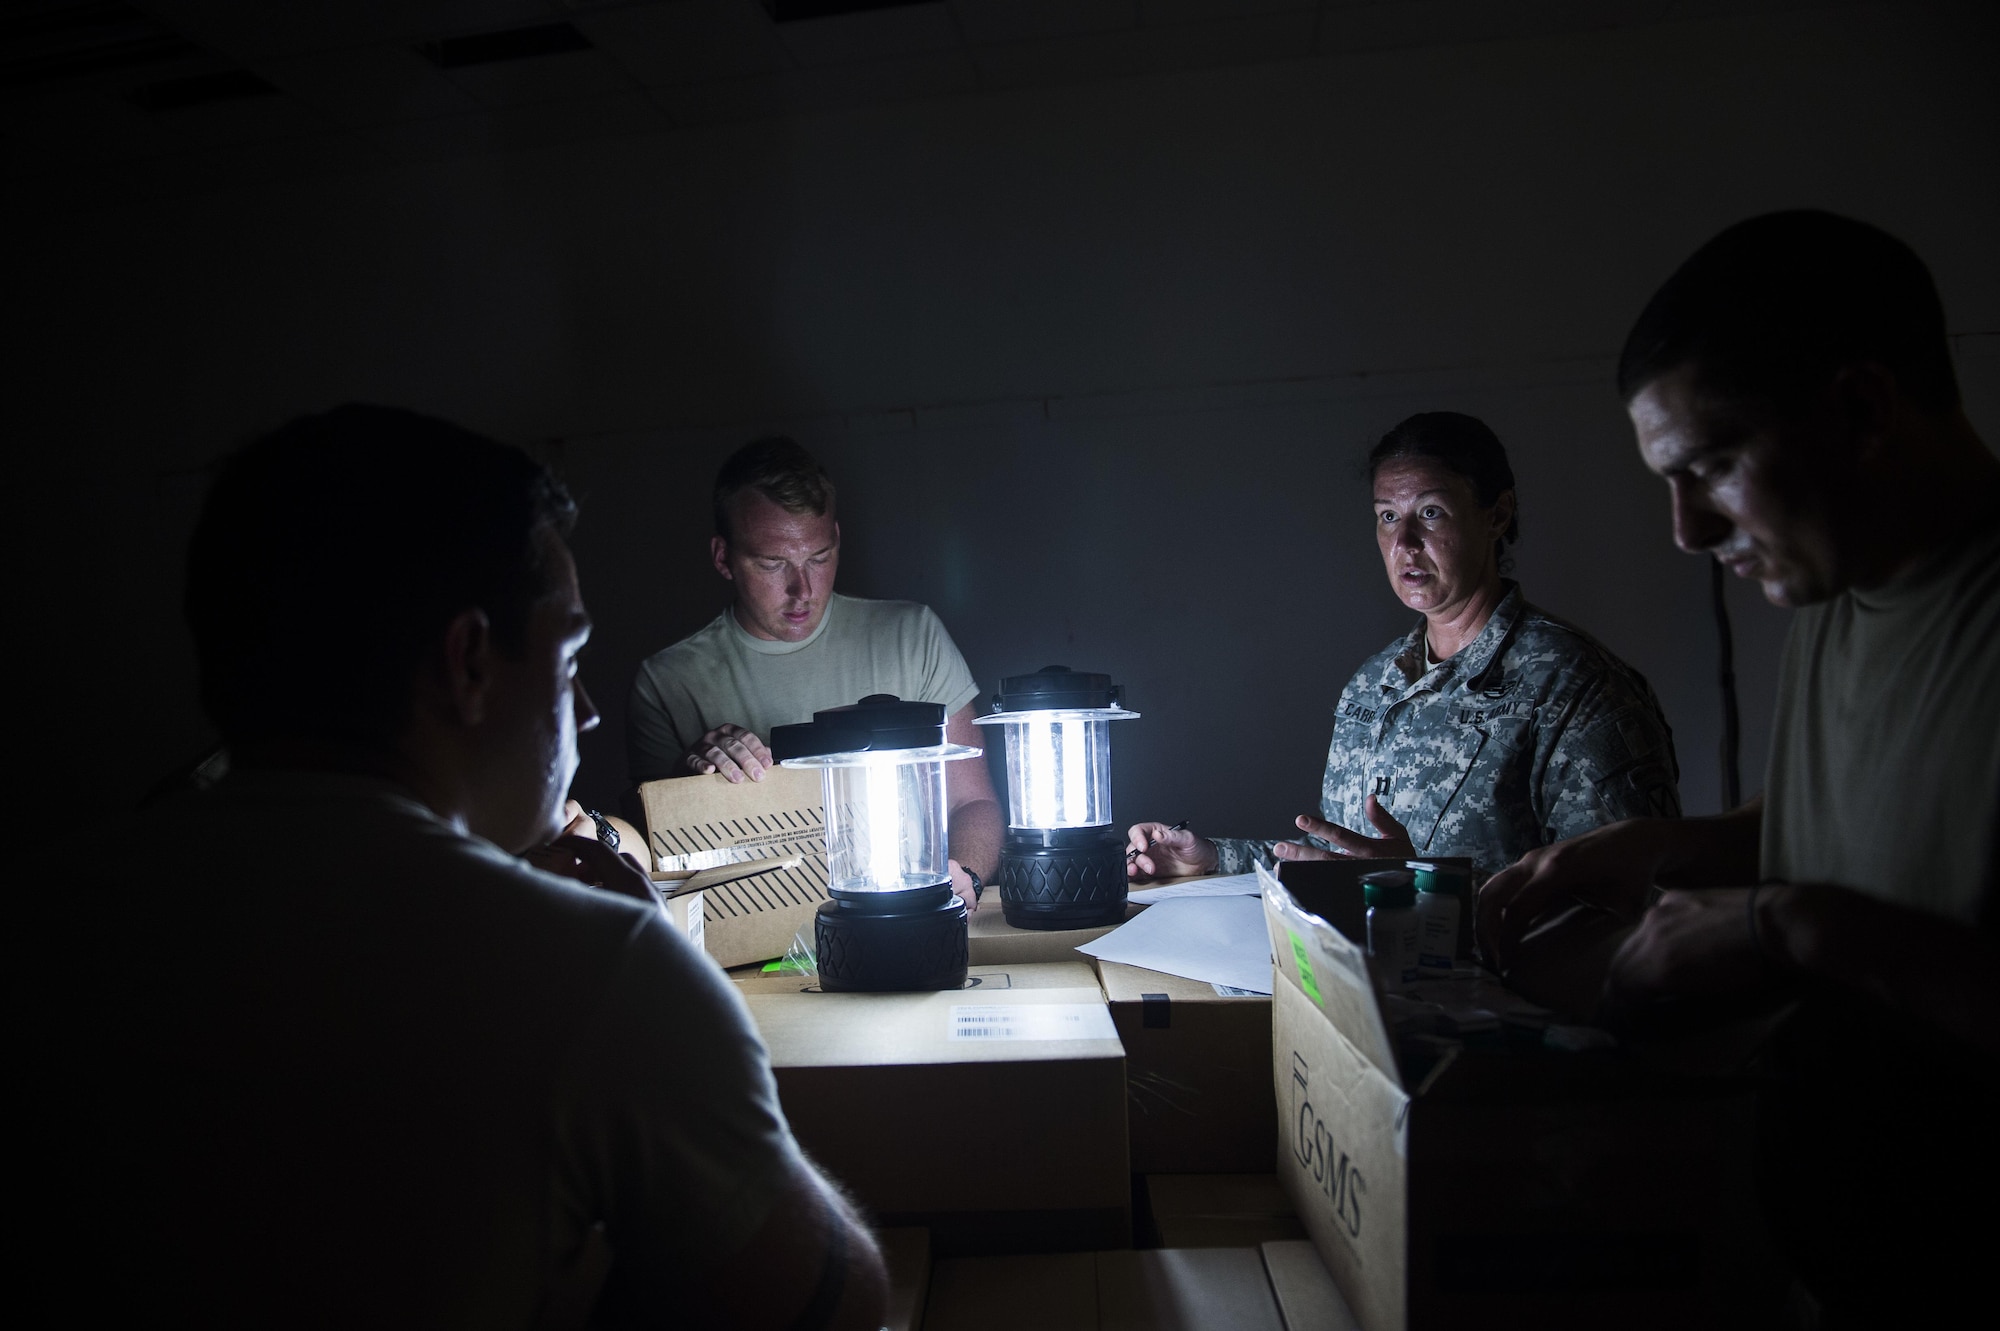 U.S. Army Capt. Beth Carriere, right, a physician assistant assigned to the Vermont National Guard's Medical Detachment, Task Force Bravo, briefs her team on how to organize the donated medications from various organizations at St. Thomas, Virgin Islands, Sept. 28, 2017.